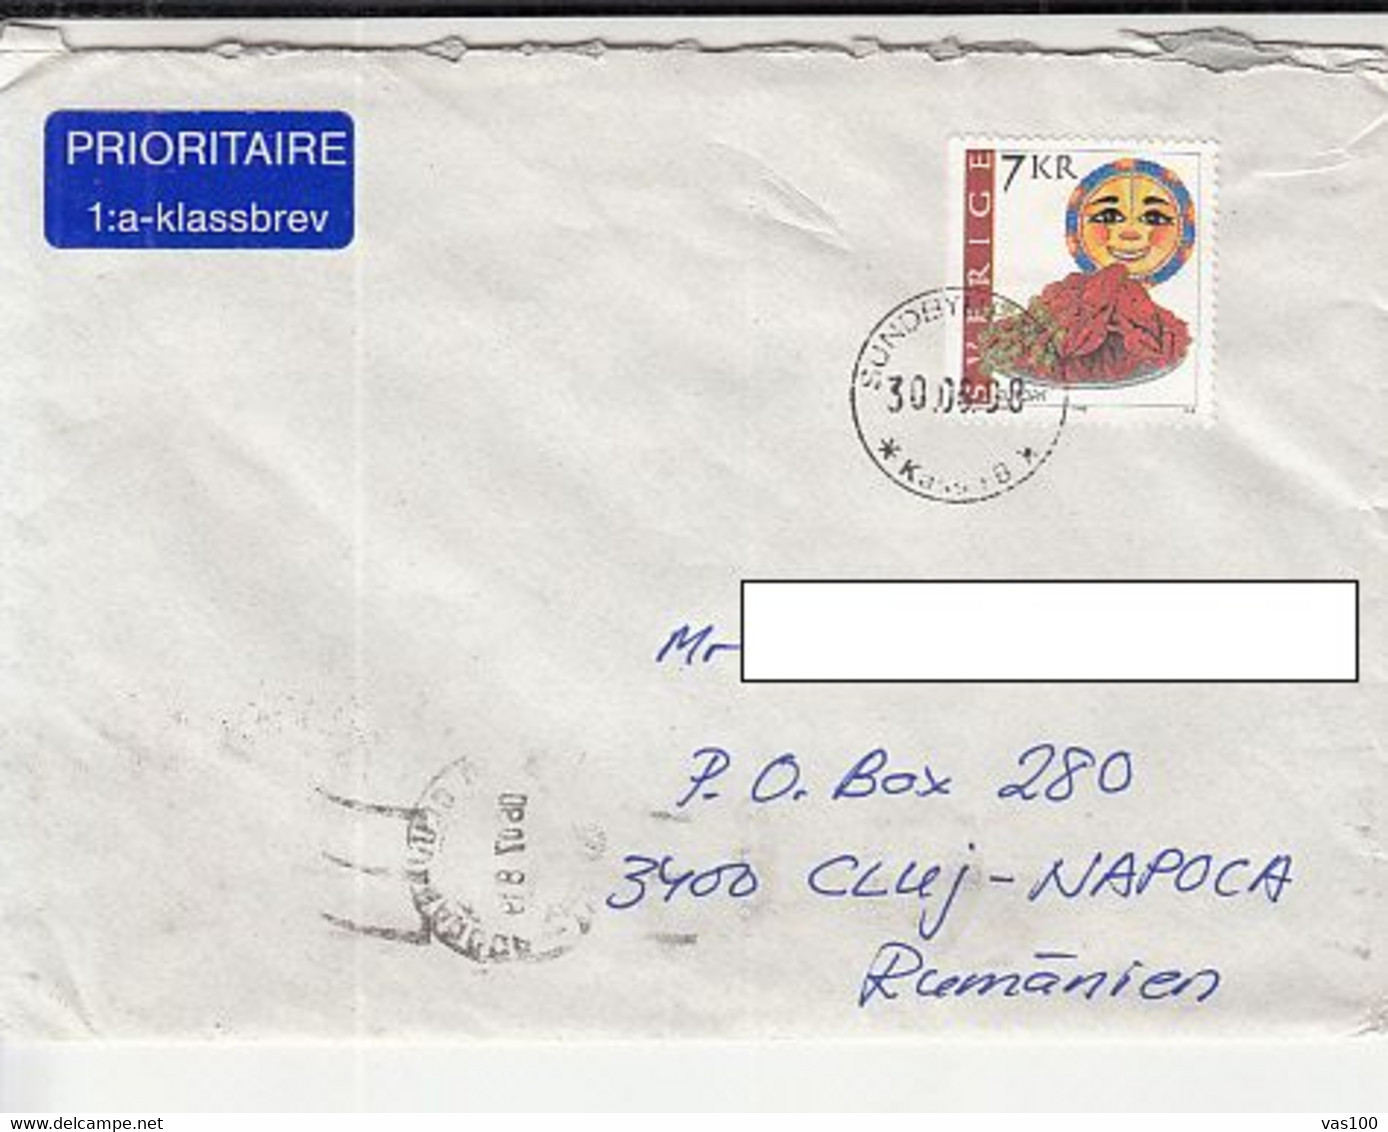 FESTIVAL STAMP ON COVER, 1998, SWEDEN - Covers & Documents